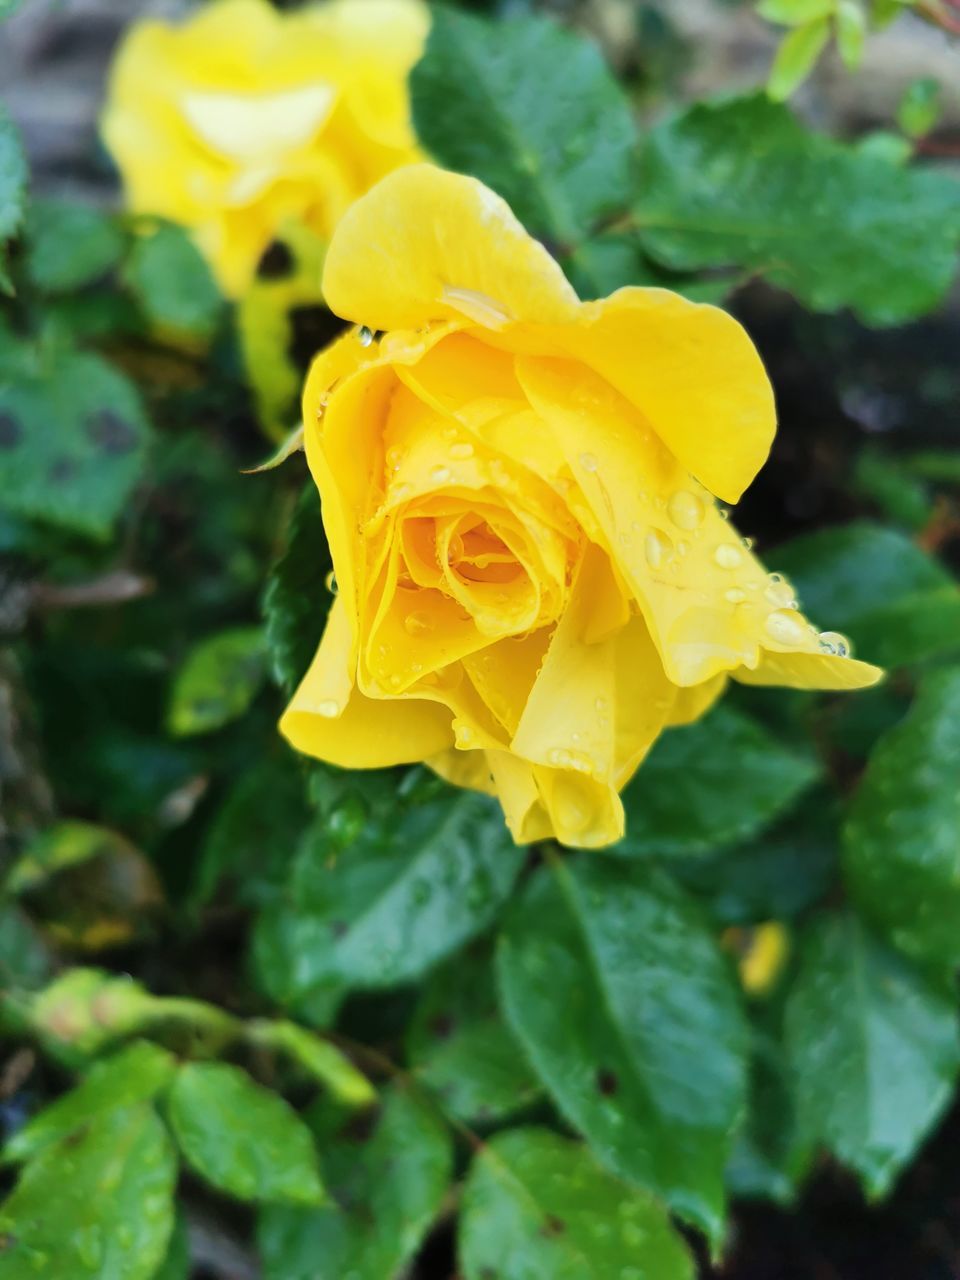 yellow, flower, plant, flowering plant, beauty in nature, freshness, petal, close-up, flower head, nature, inflorescence, rose, fragility, growth, plant part, leaf, no people, wet, focus on foreground, outdoors, water, drop, springtime, garden roses, day, green, vibrant color, blossom, rain, garden